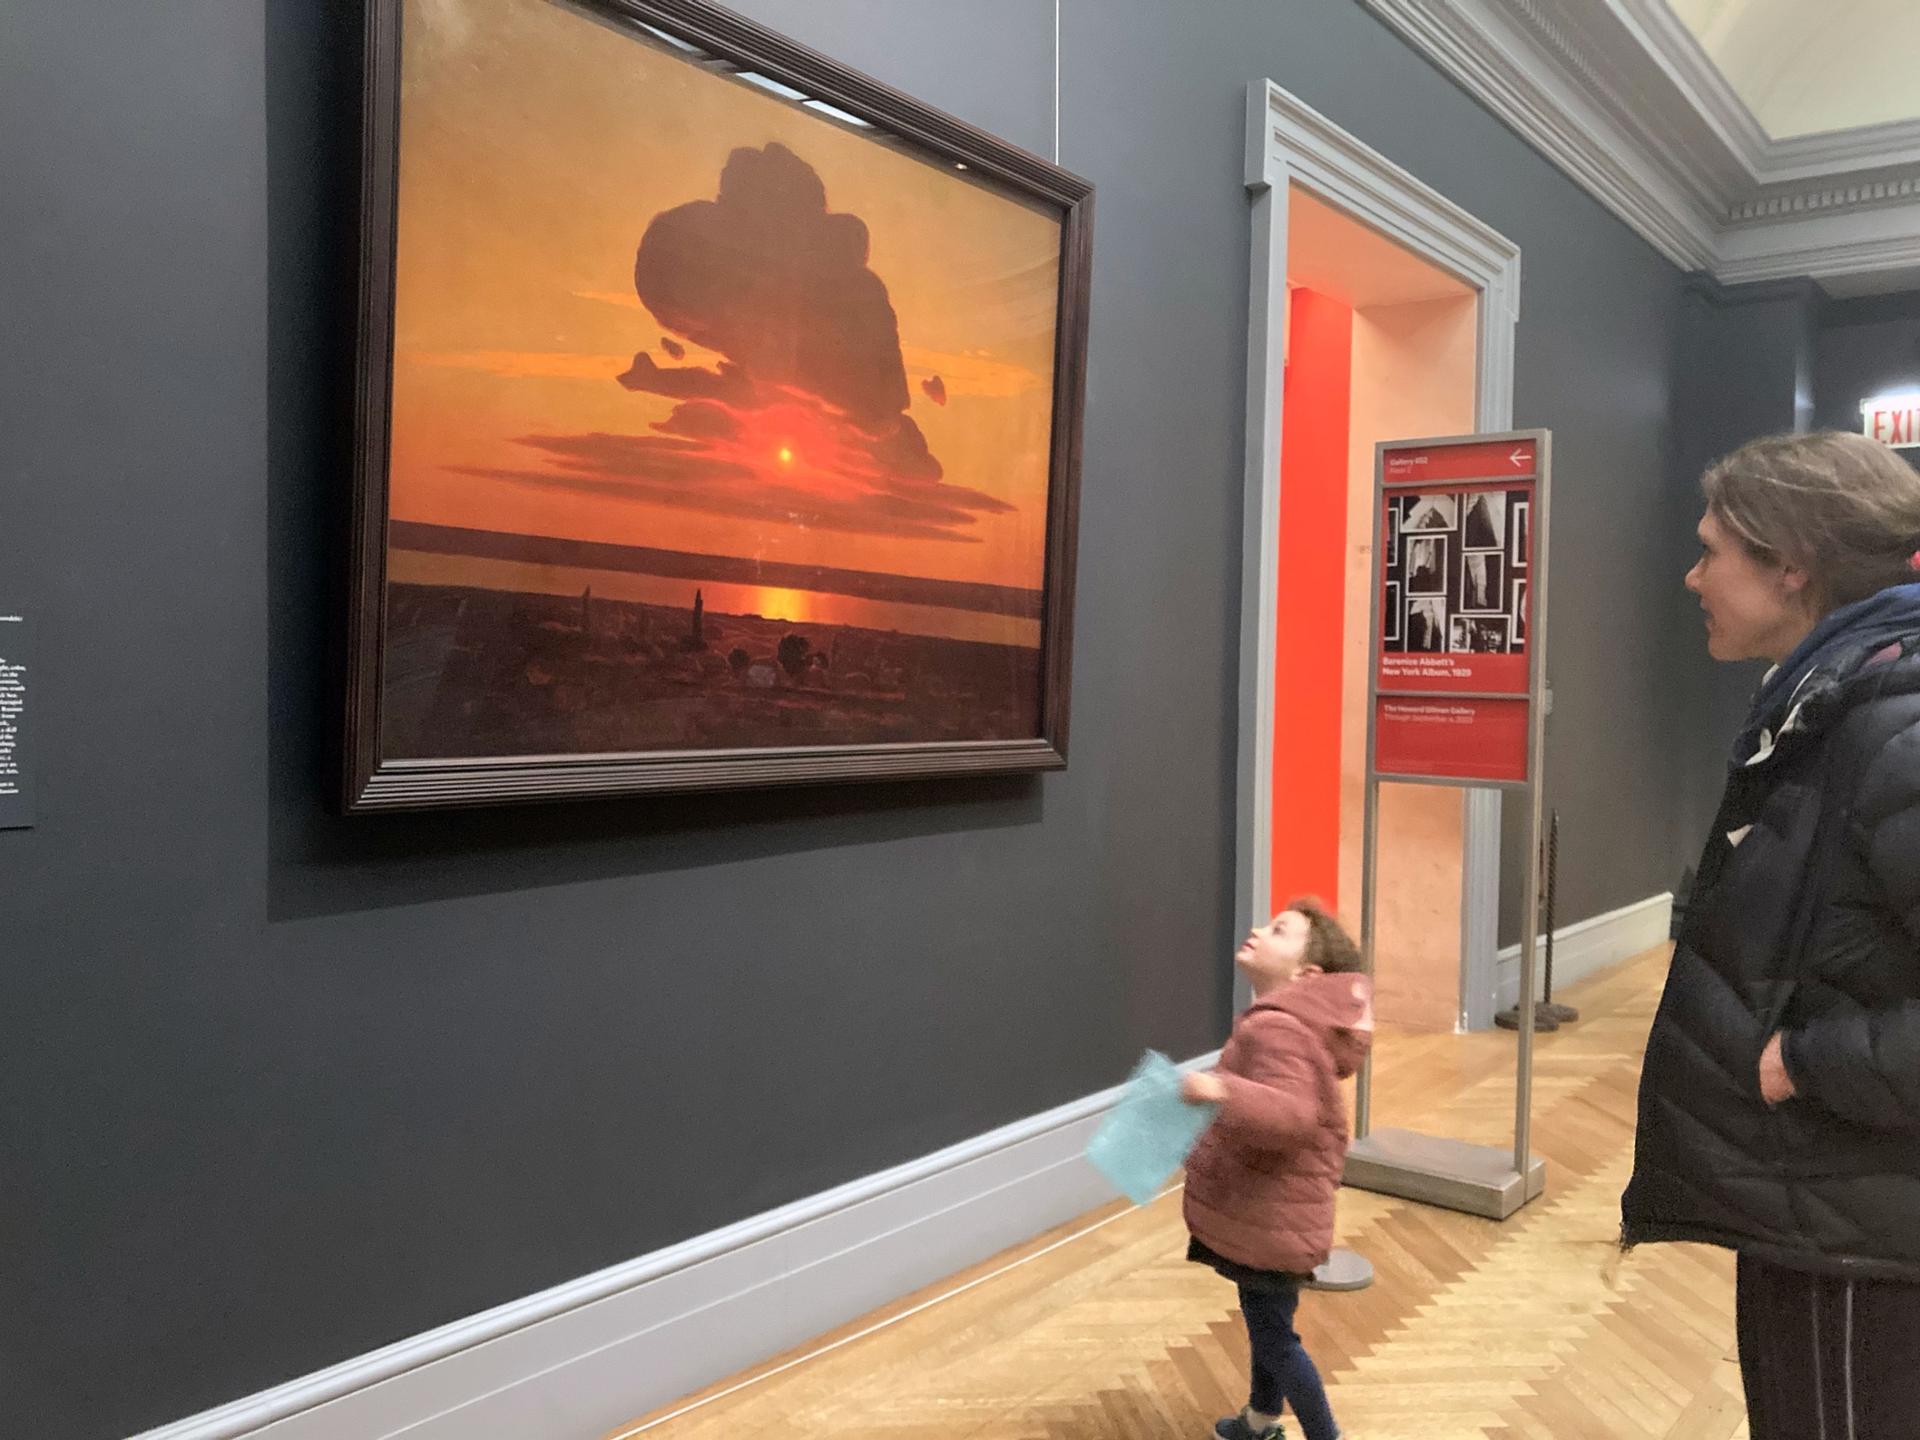 Visitors take in the painting "Red Sunset" at the Met. 